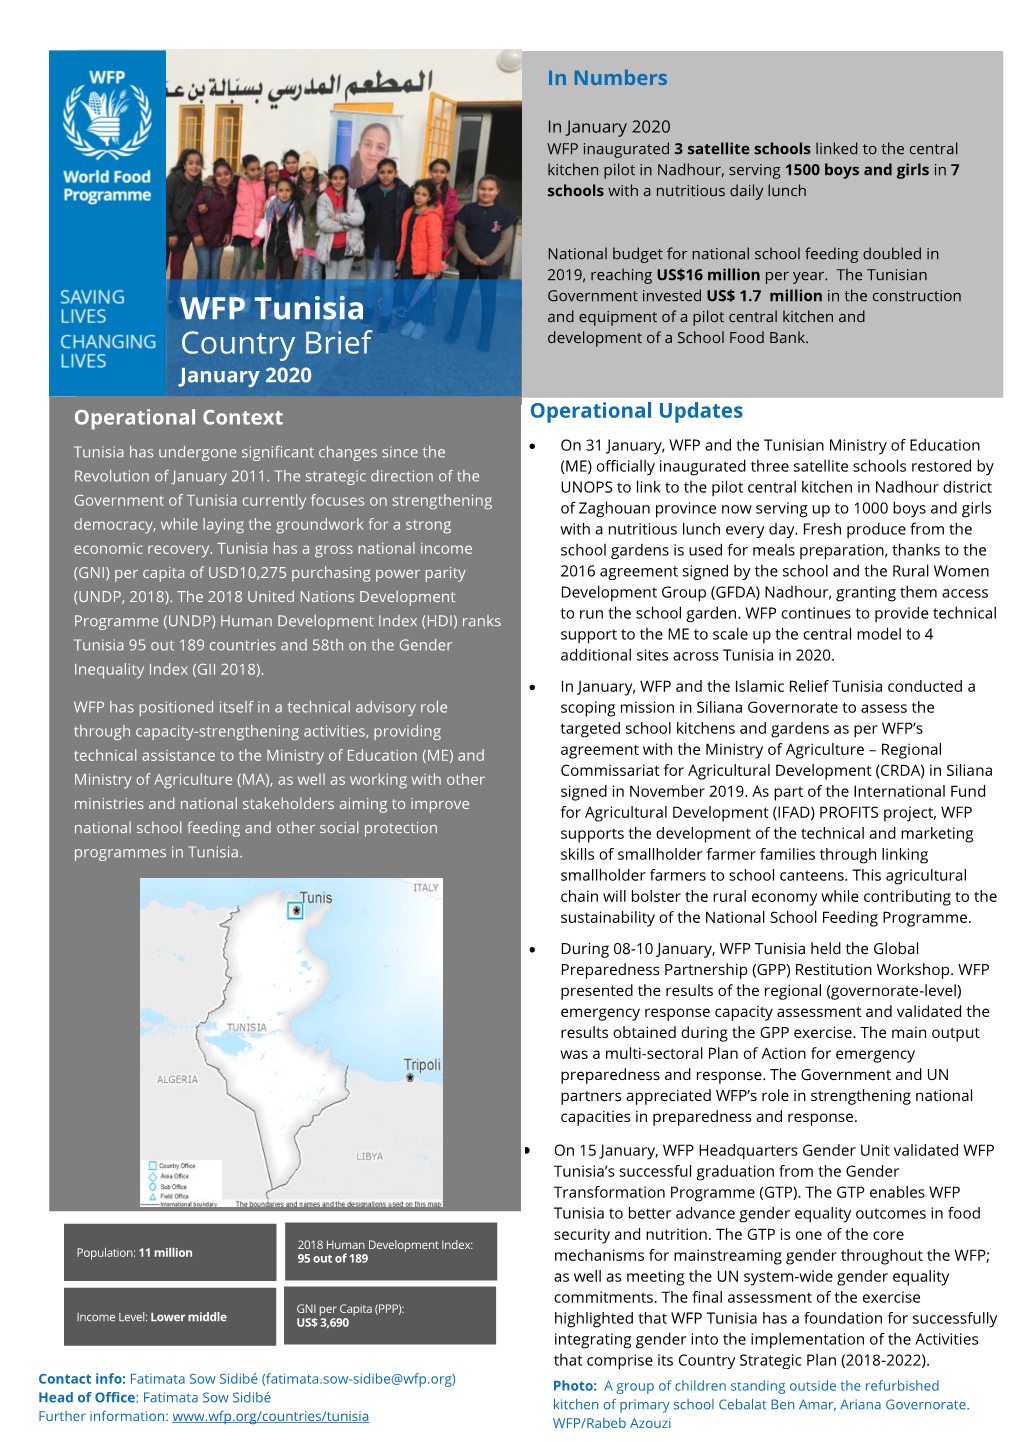 WFP Tunisia Country Brief Agricultural Development of Siliana (CRDA) January 2020 • UNAIDS - Unified Budget, Results and Accountability